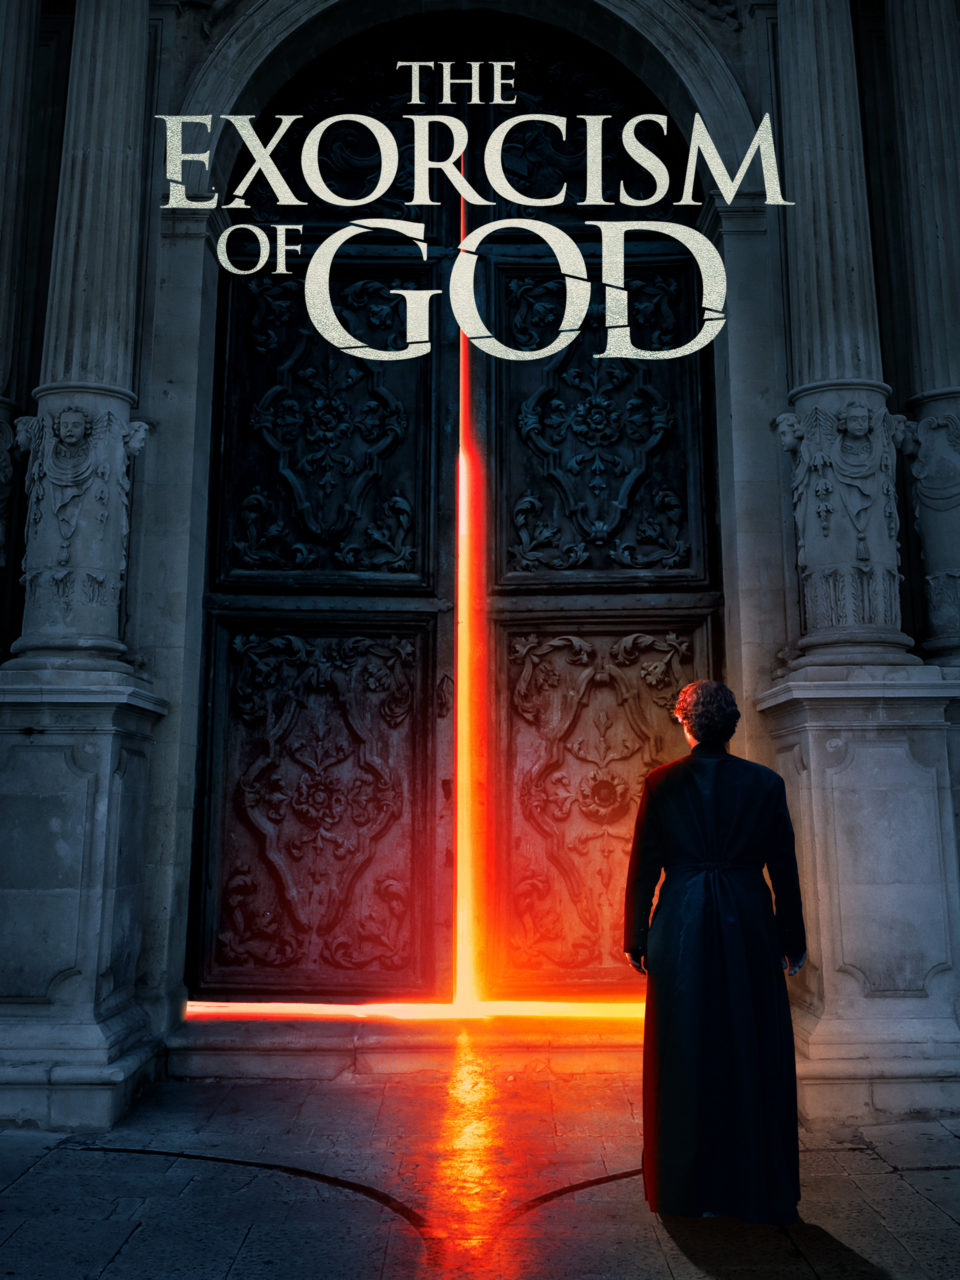 The Exorcism Of God cover (Lionsgate)